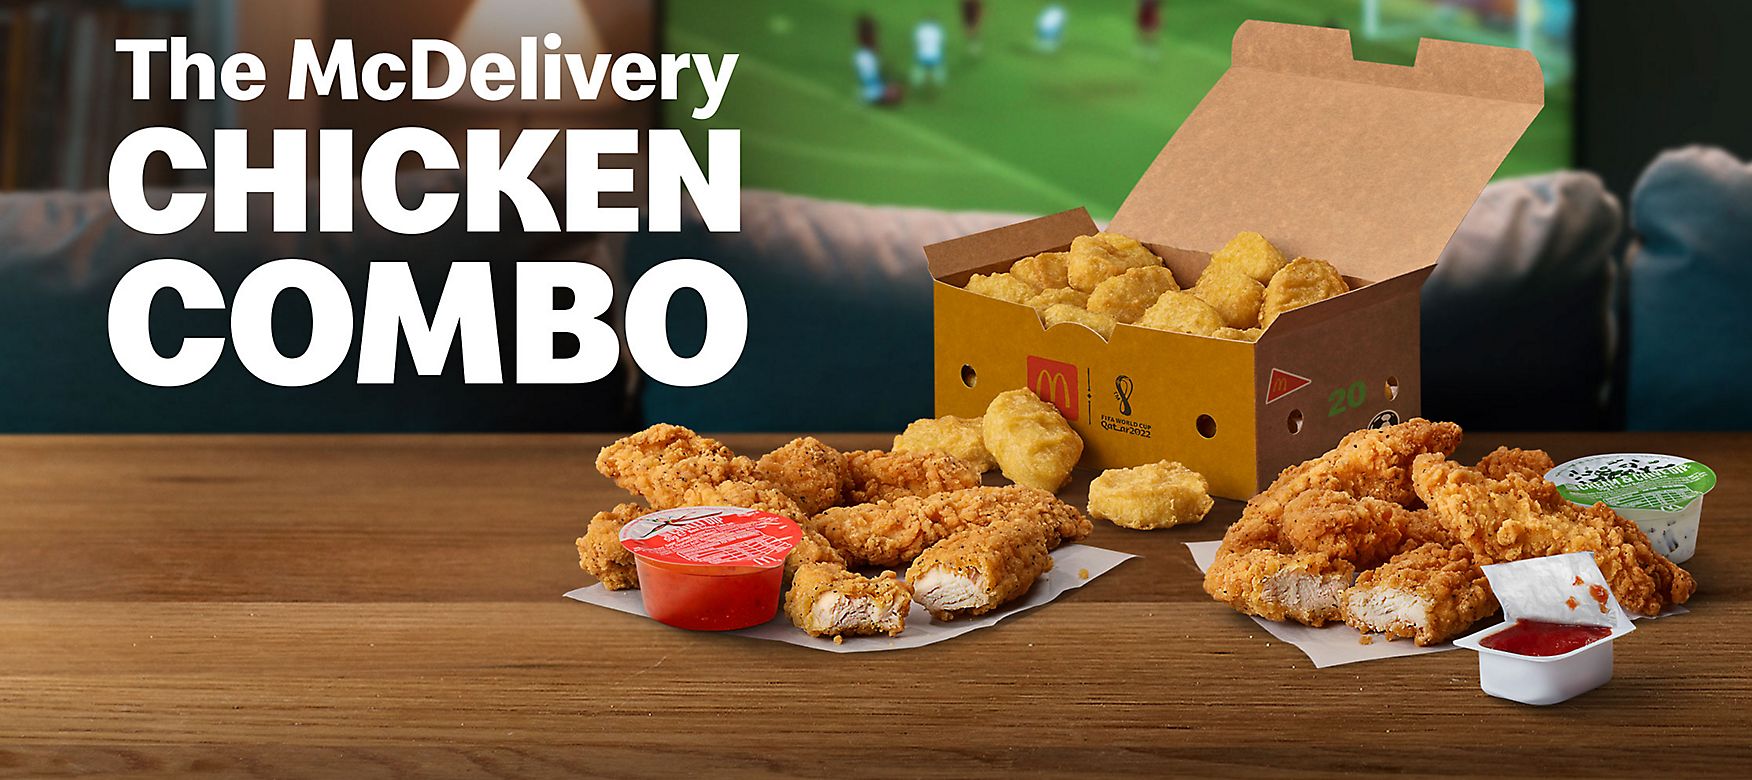 The McDelivery Chicken Combo